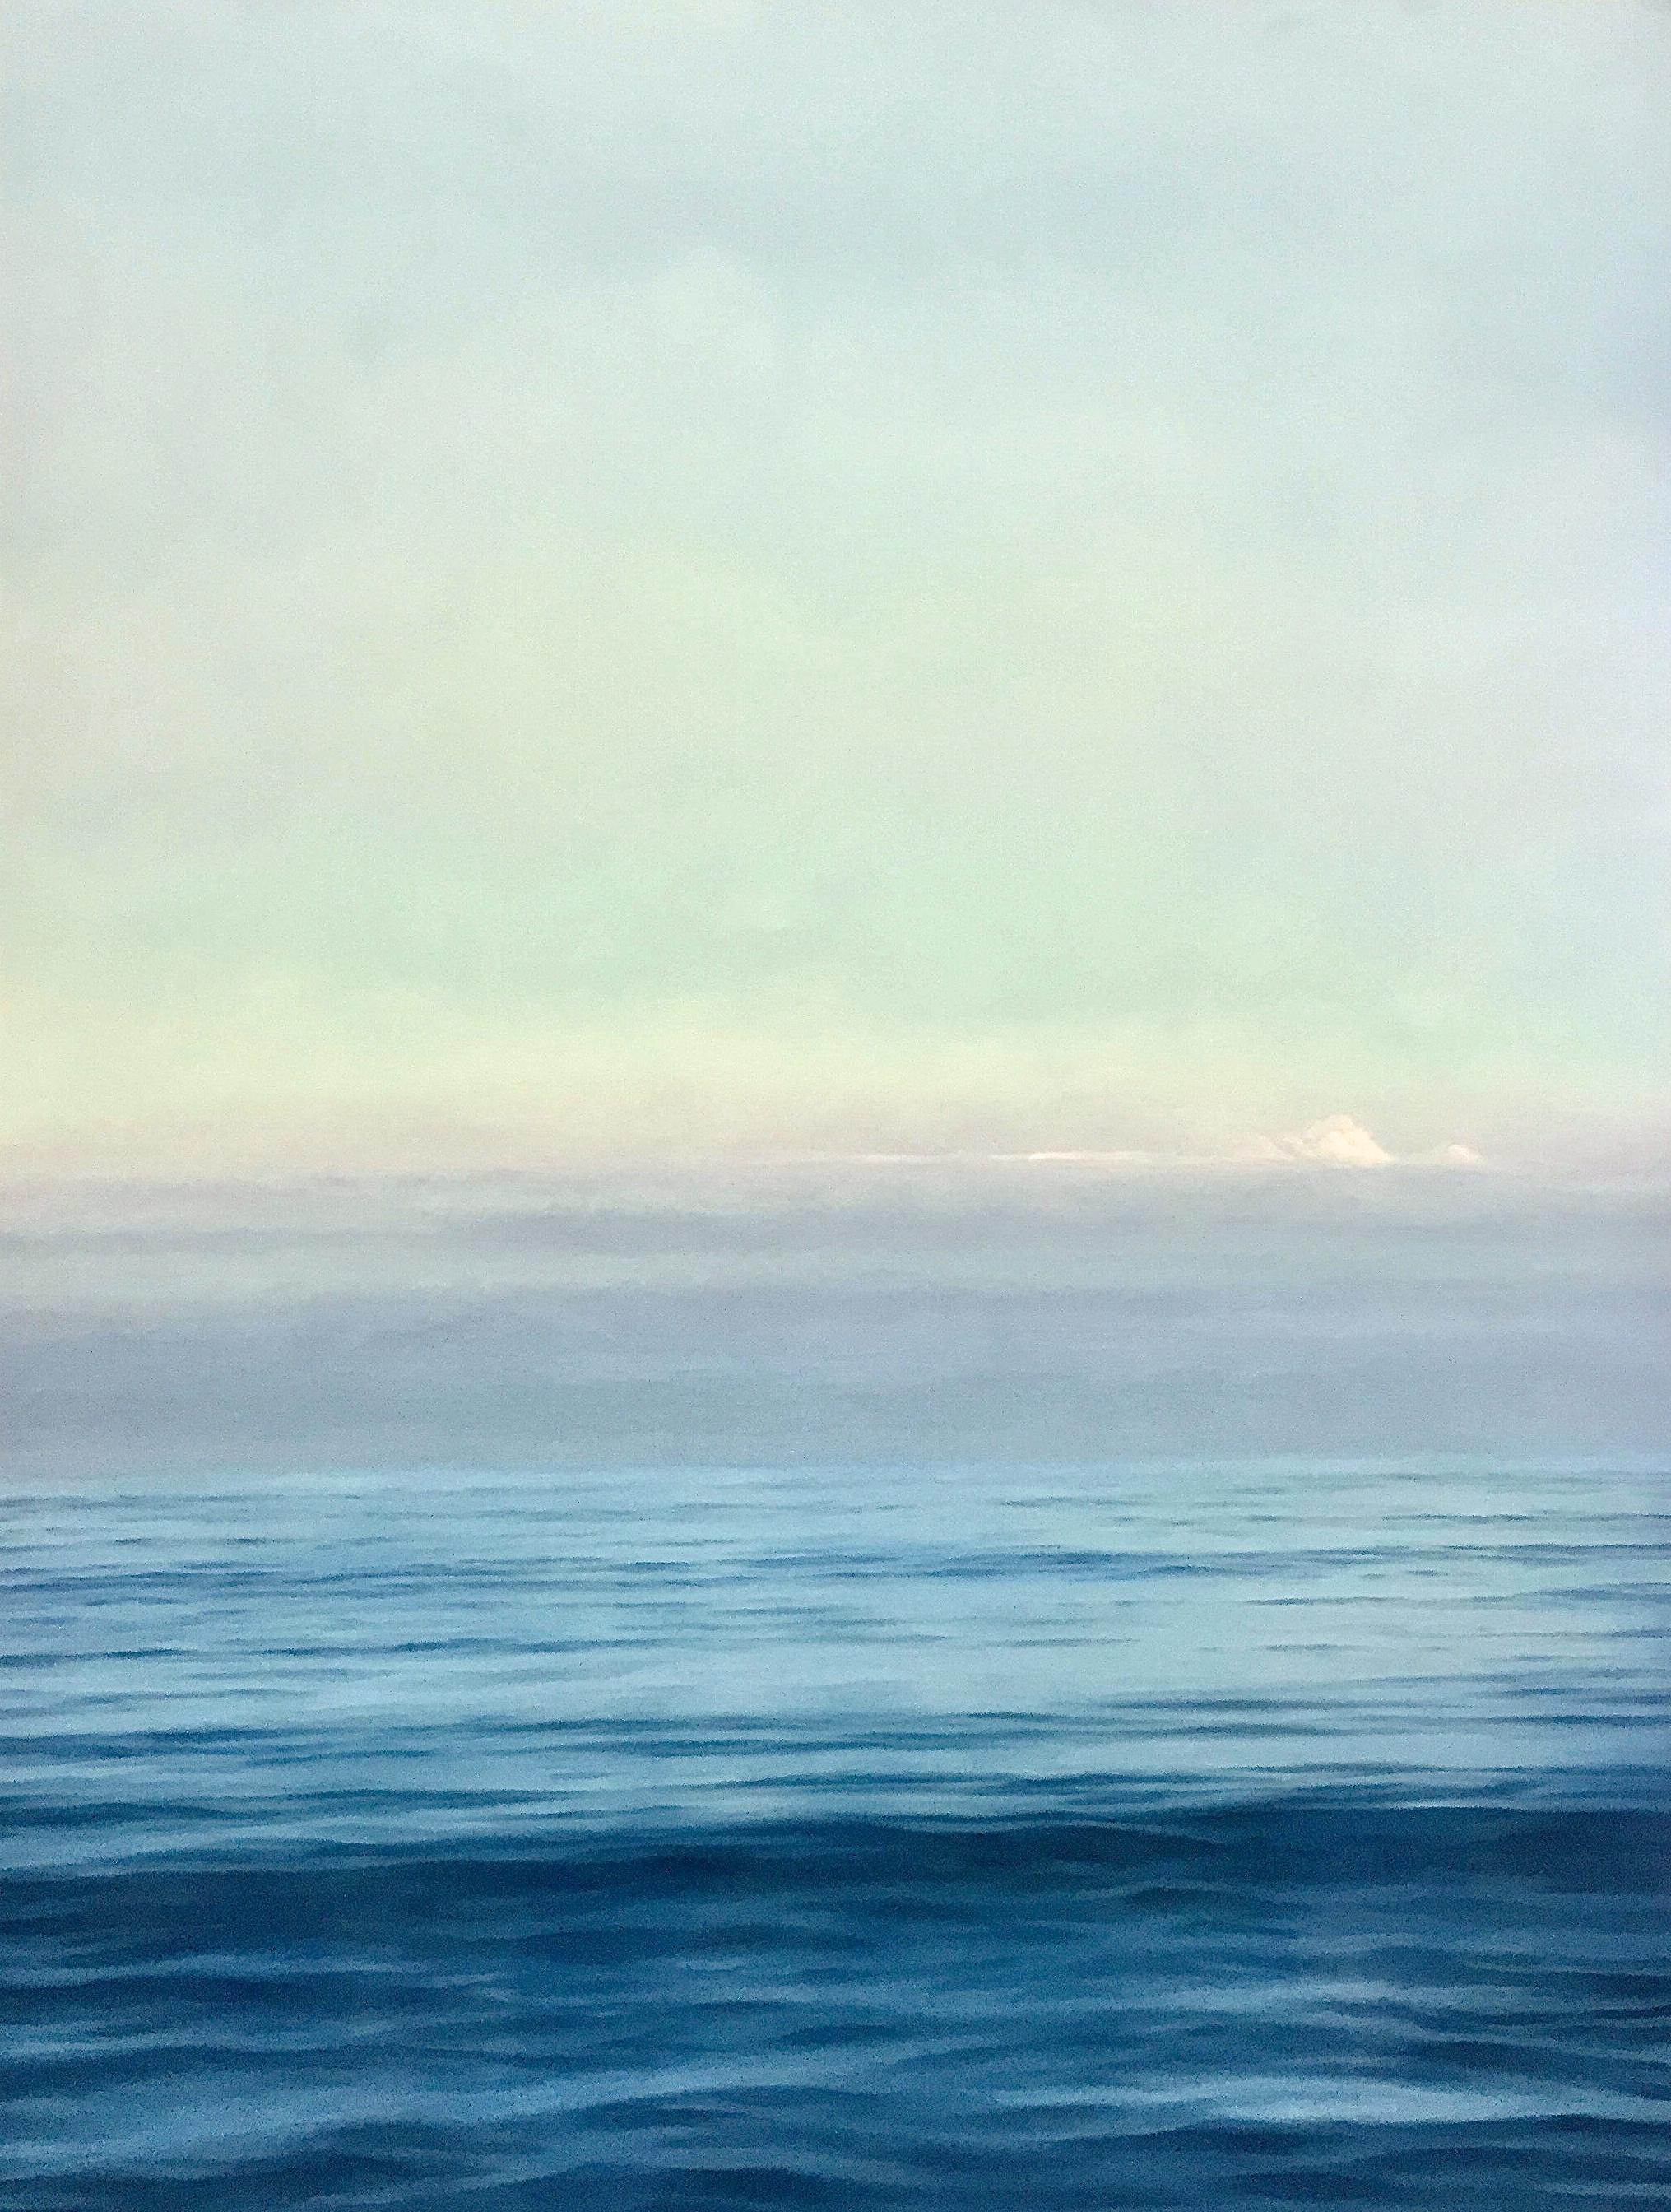 Chris Armstrong Landscape Painting - "Promise, Highly Realistic Contemporary Water (Ocean) Painting at Dusk"